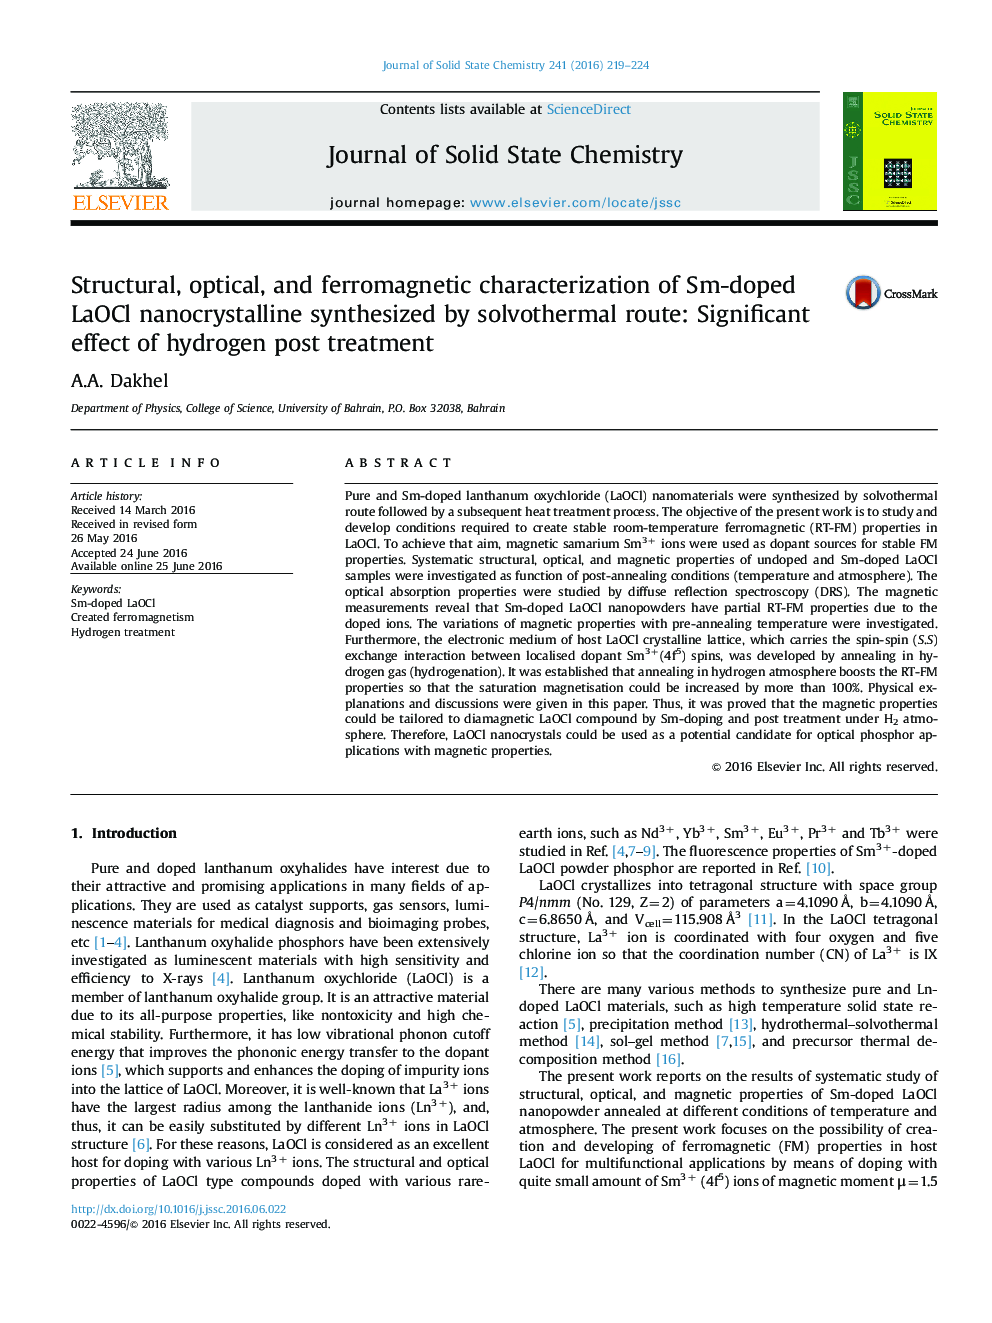 Structural, optical, and ferromagnetic characterization of Sm-doped LaOCl nanocrystalline synthesized by solvothermal route: Significant effect of hydrogen post treatment